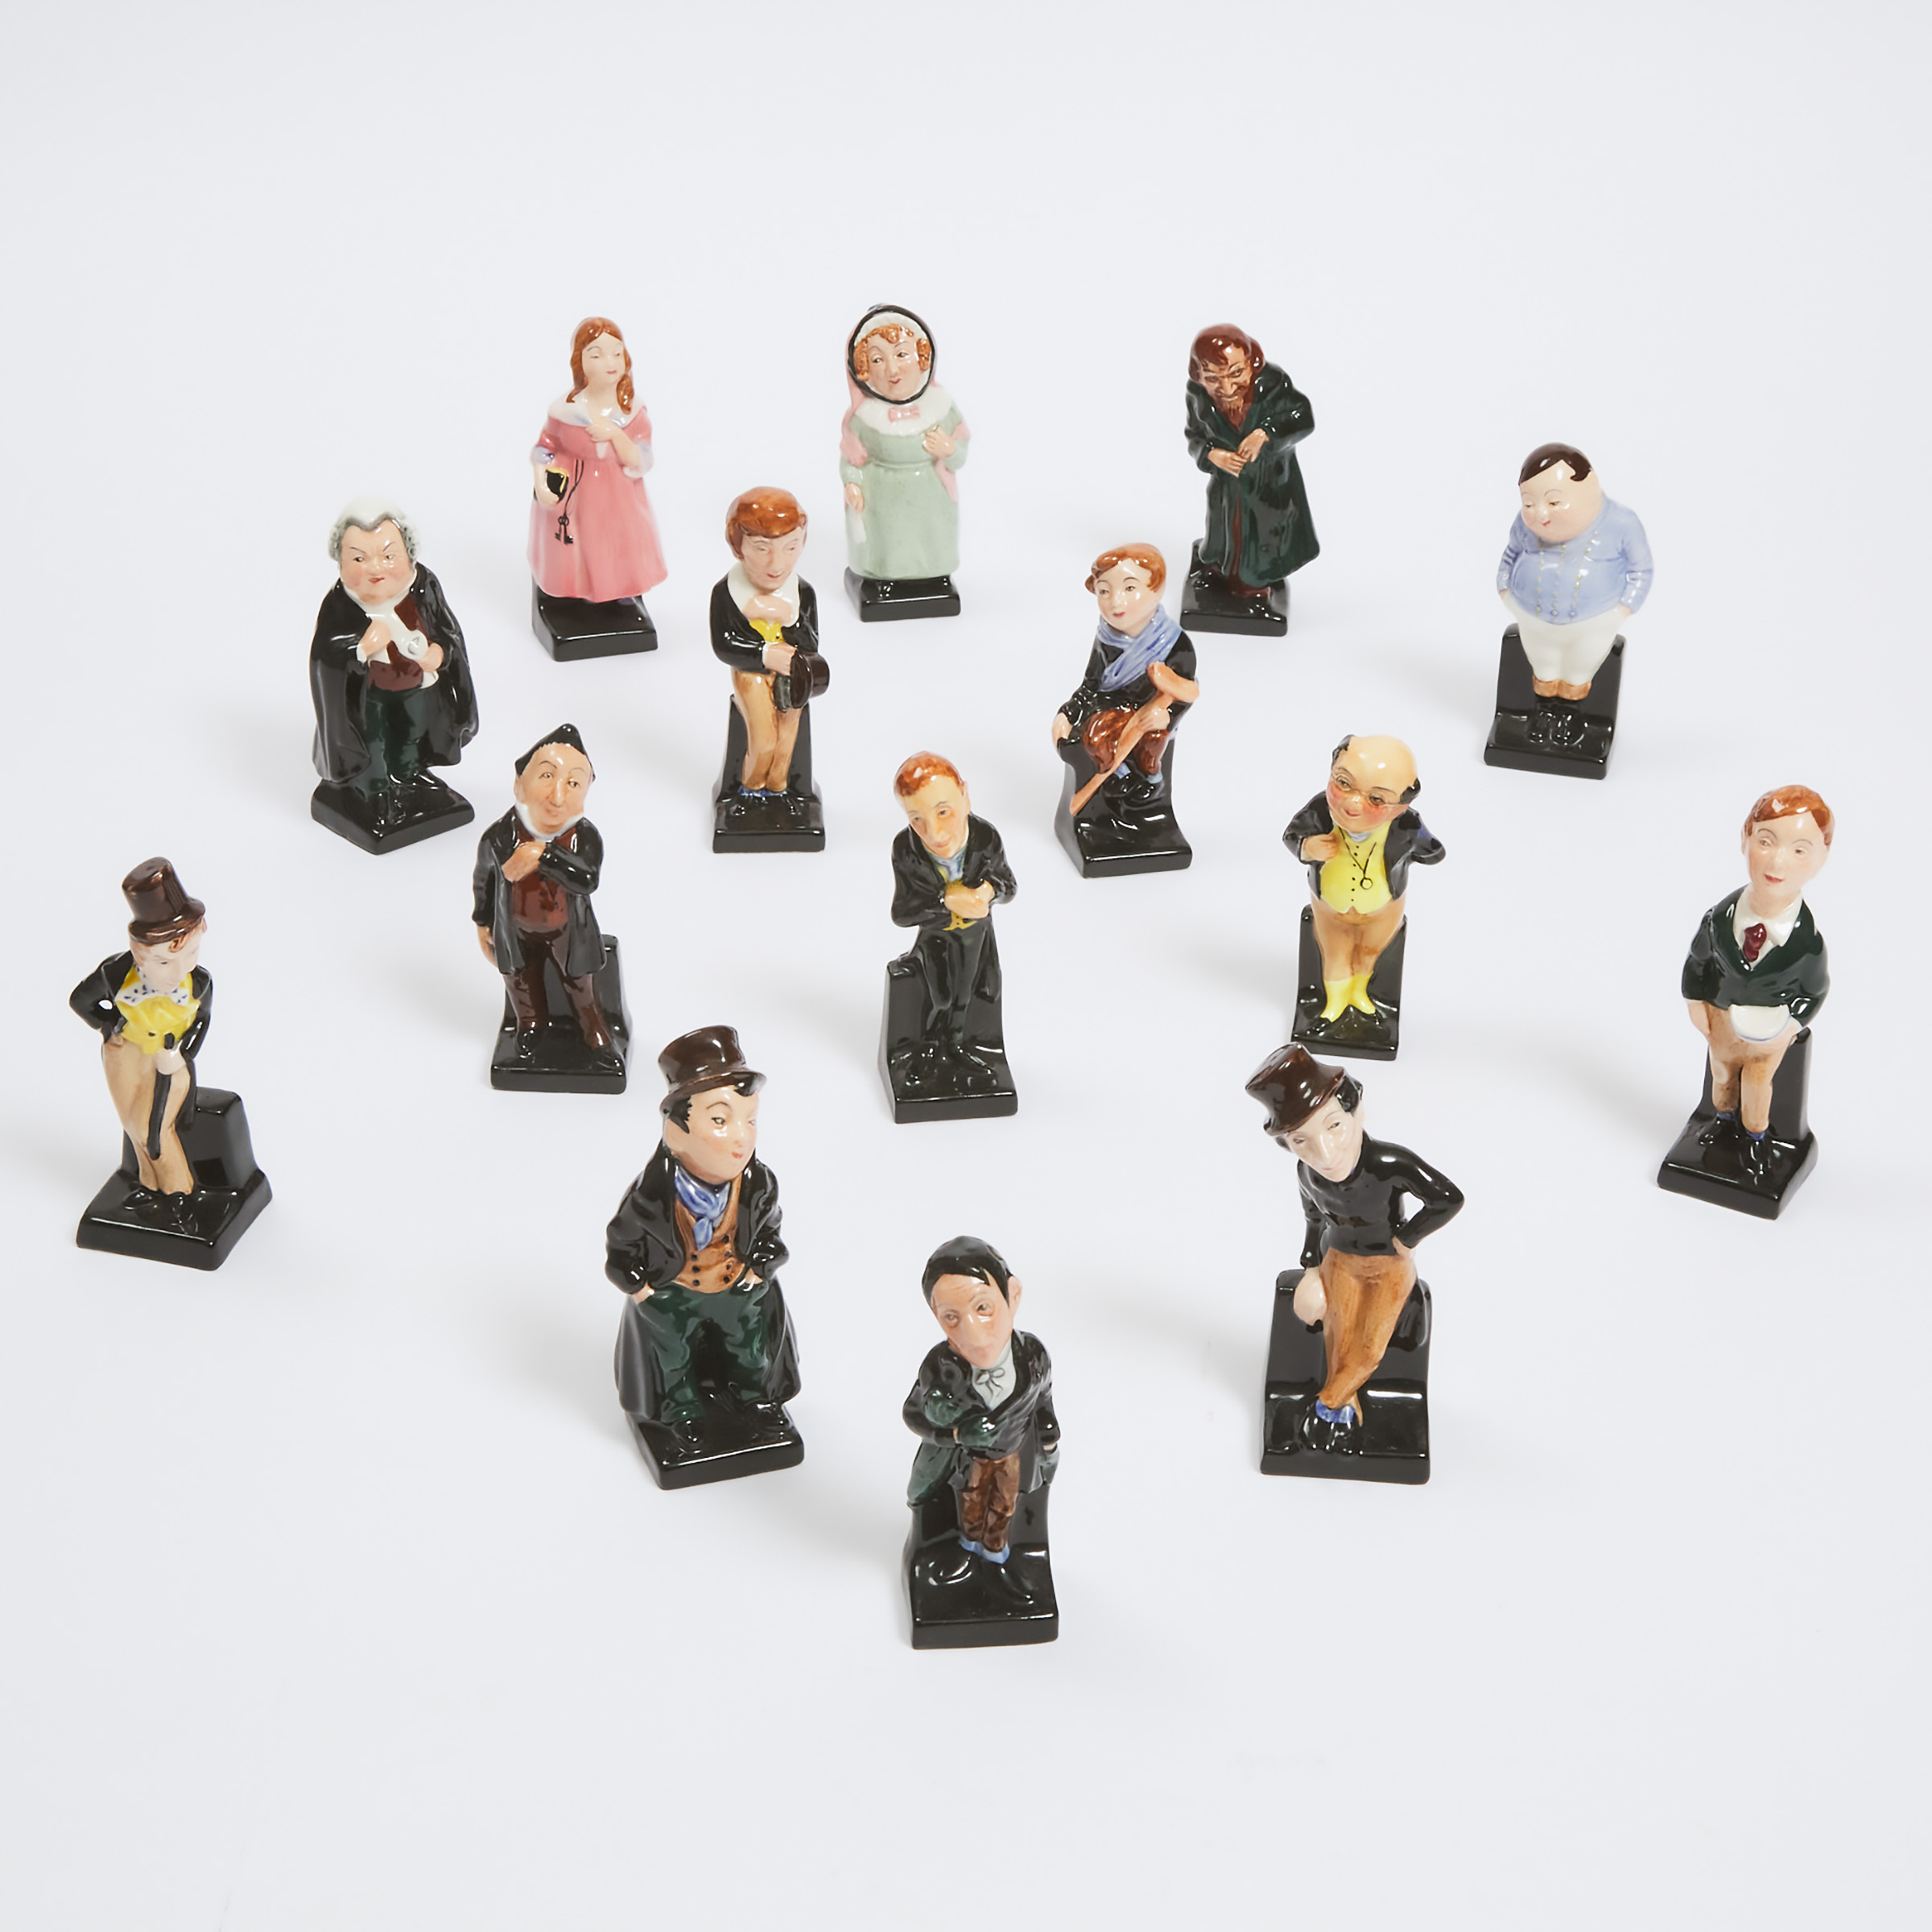 Fifteen Miniature Royal Doulton Charles Dickens Character Figurines, 20th century